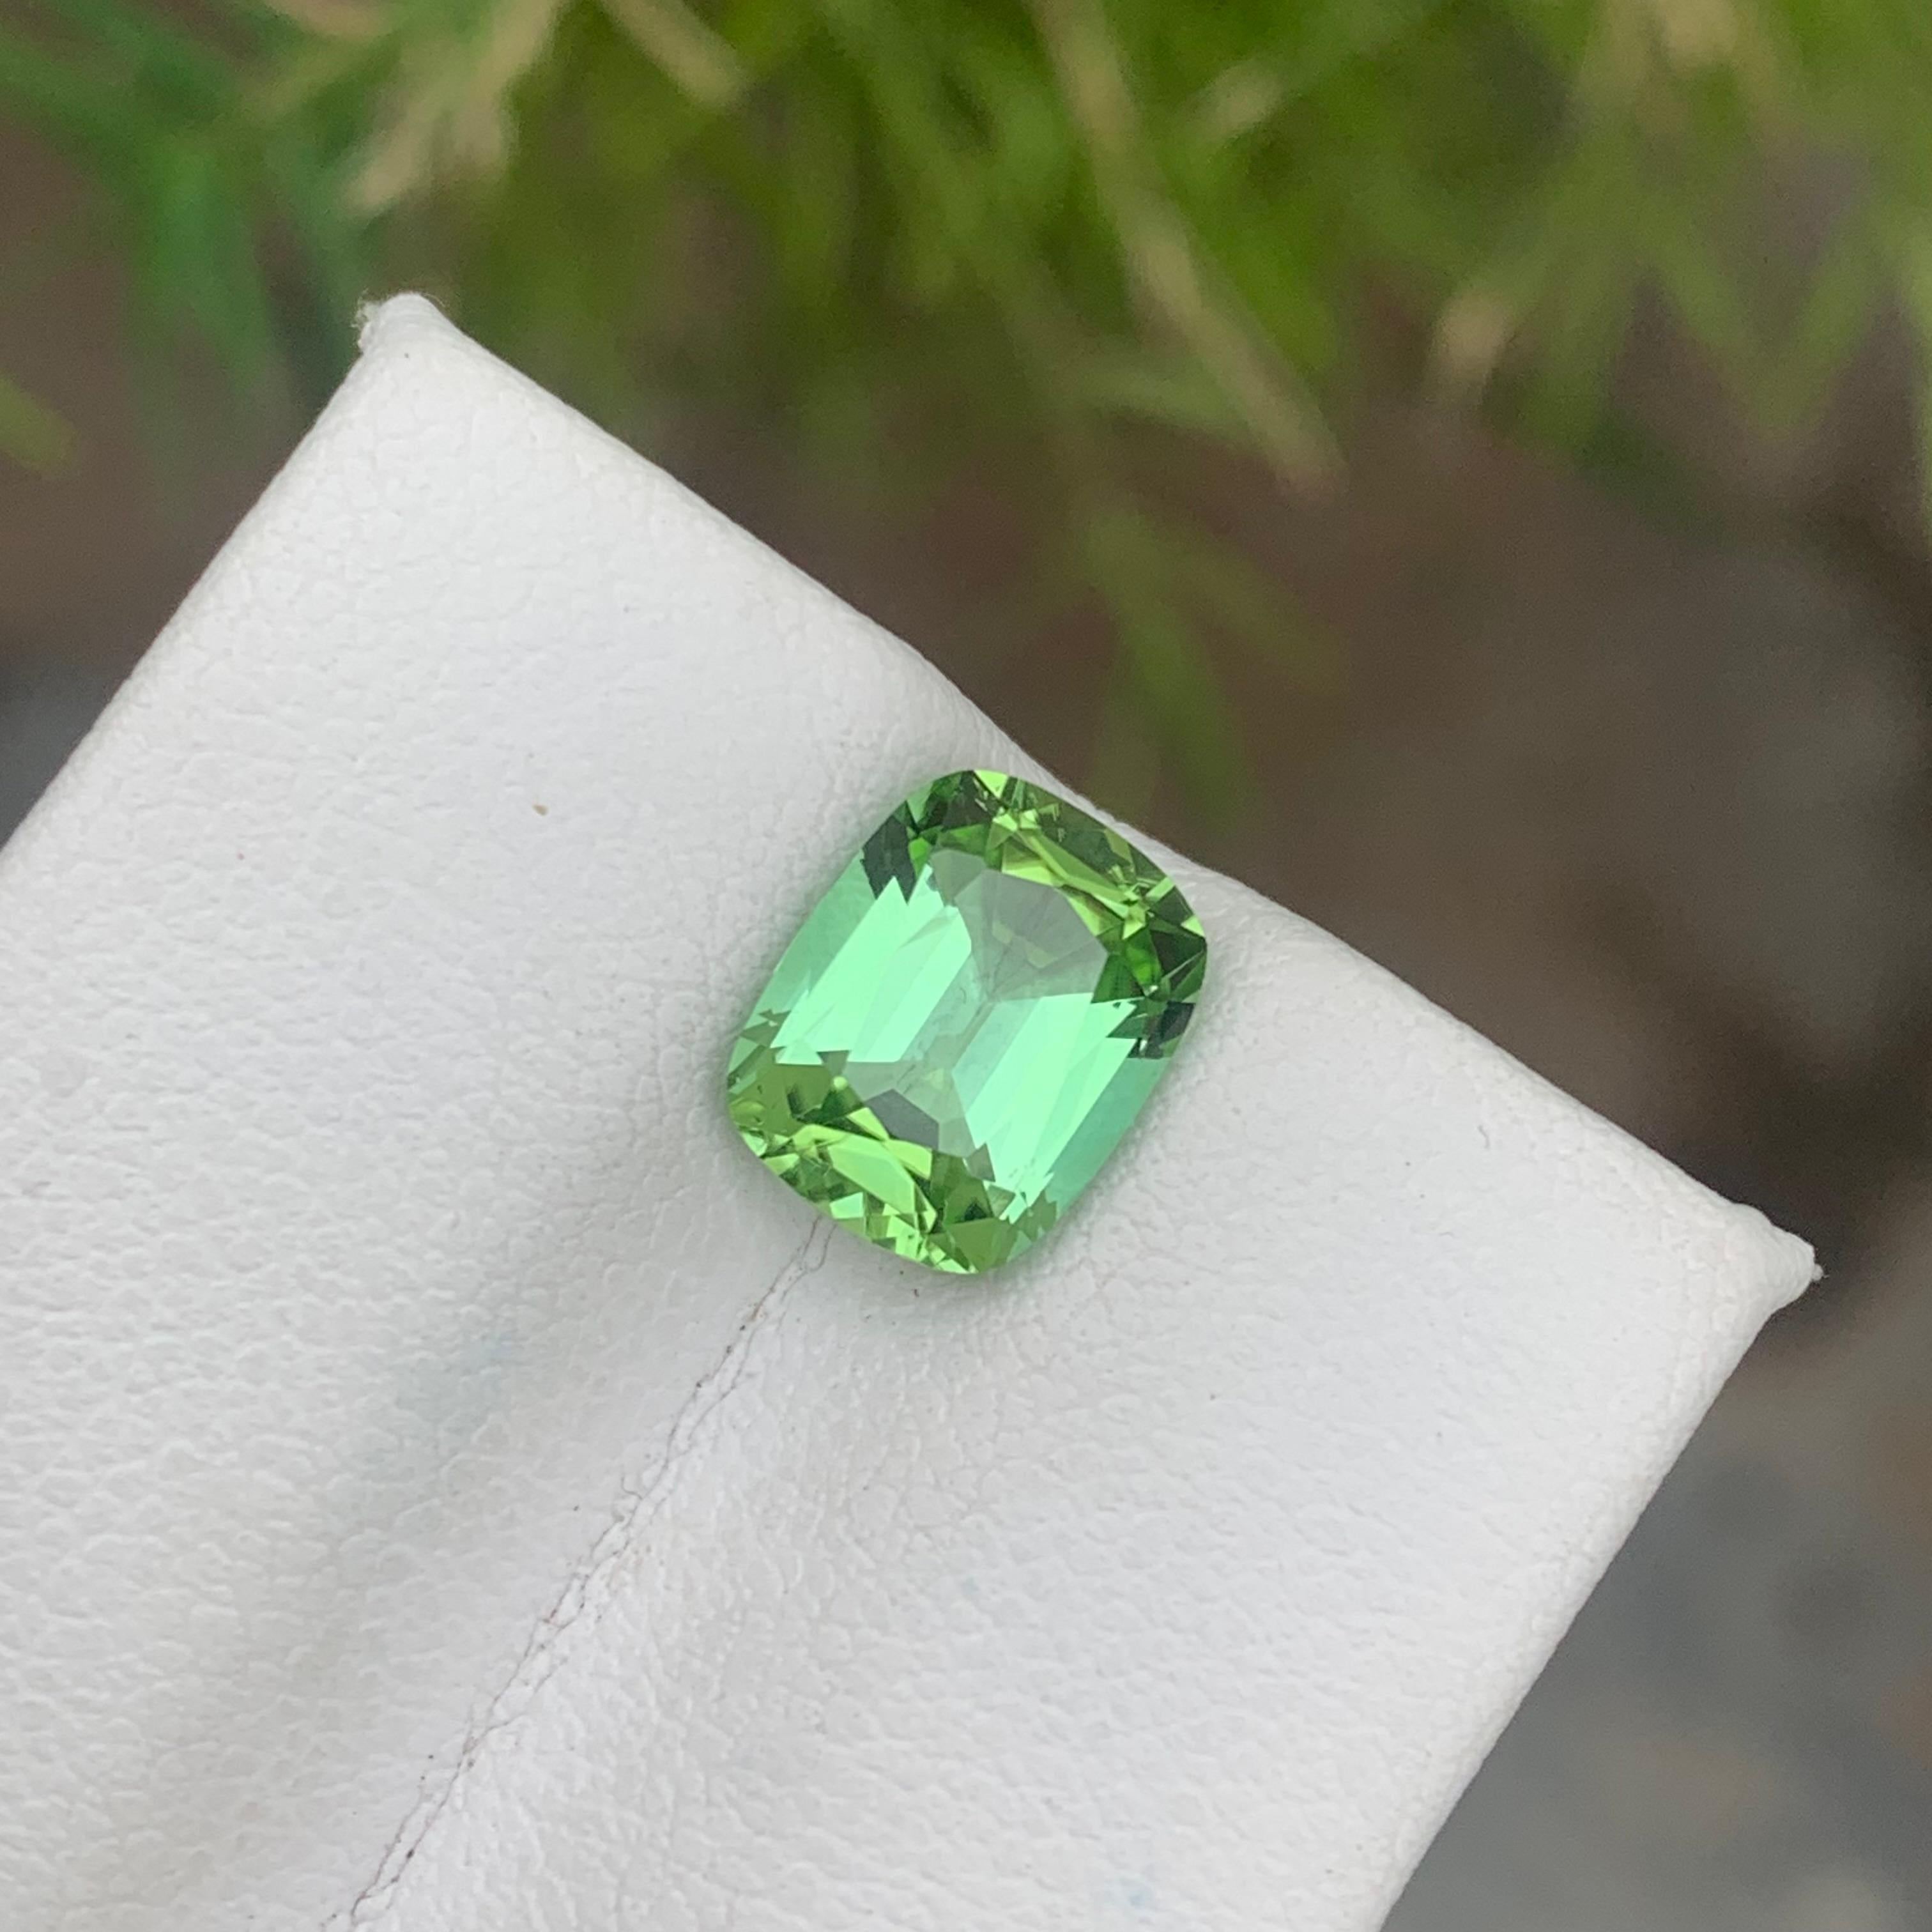 Stunning 2.65 Carat Natural Loose Tourmaline Ring Cushion Cut From Afghanistan For Sale 7